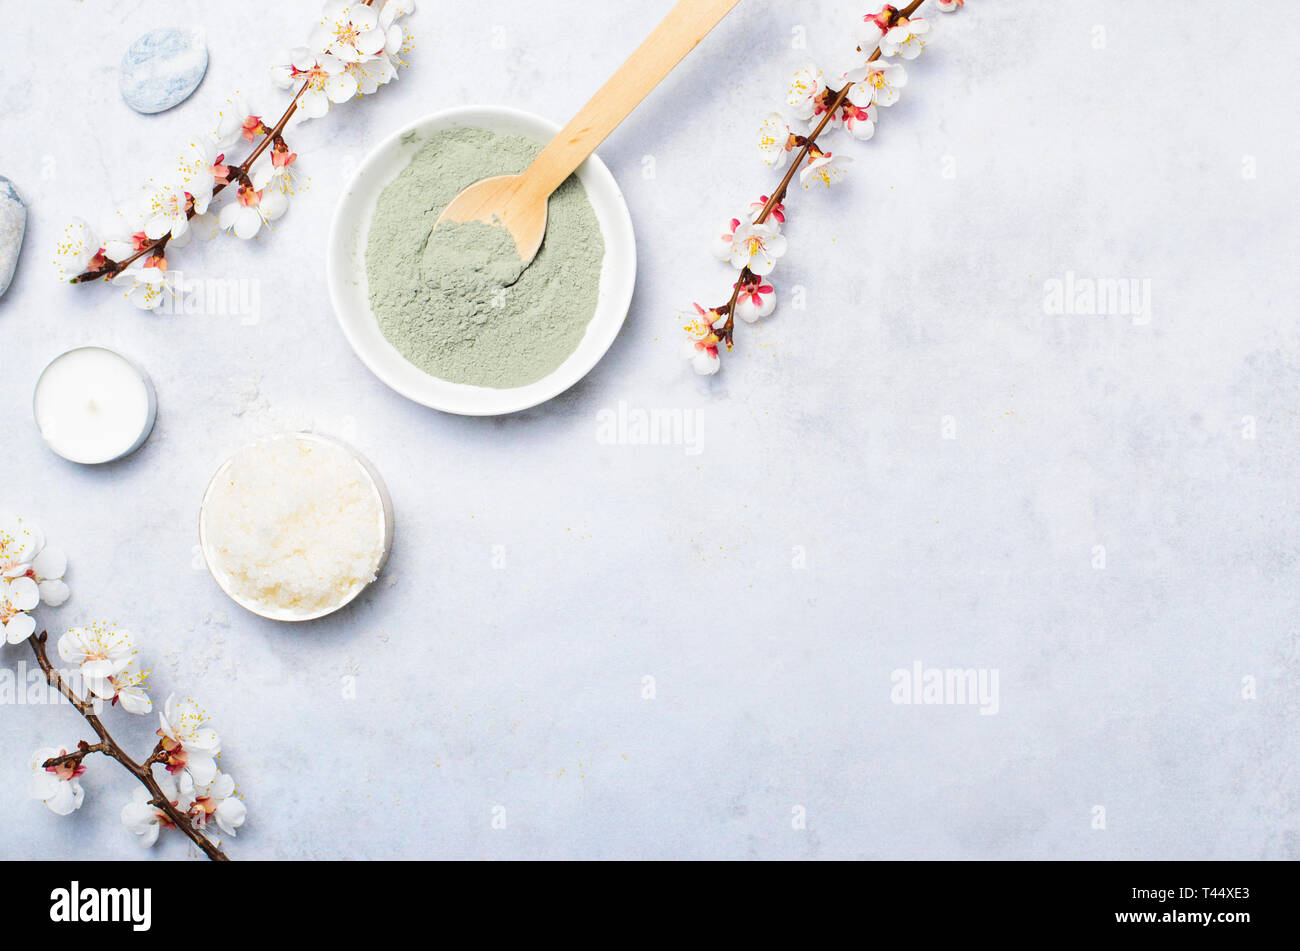 Spa Wellness Background, Natural Cosmetics, Clay Powder and Sugar Scrub, Preparing Skincare Products, Top View Stock Photo